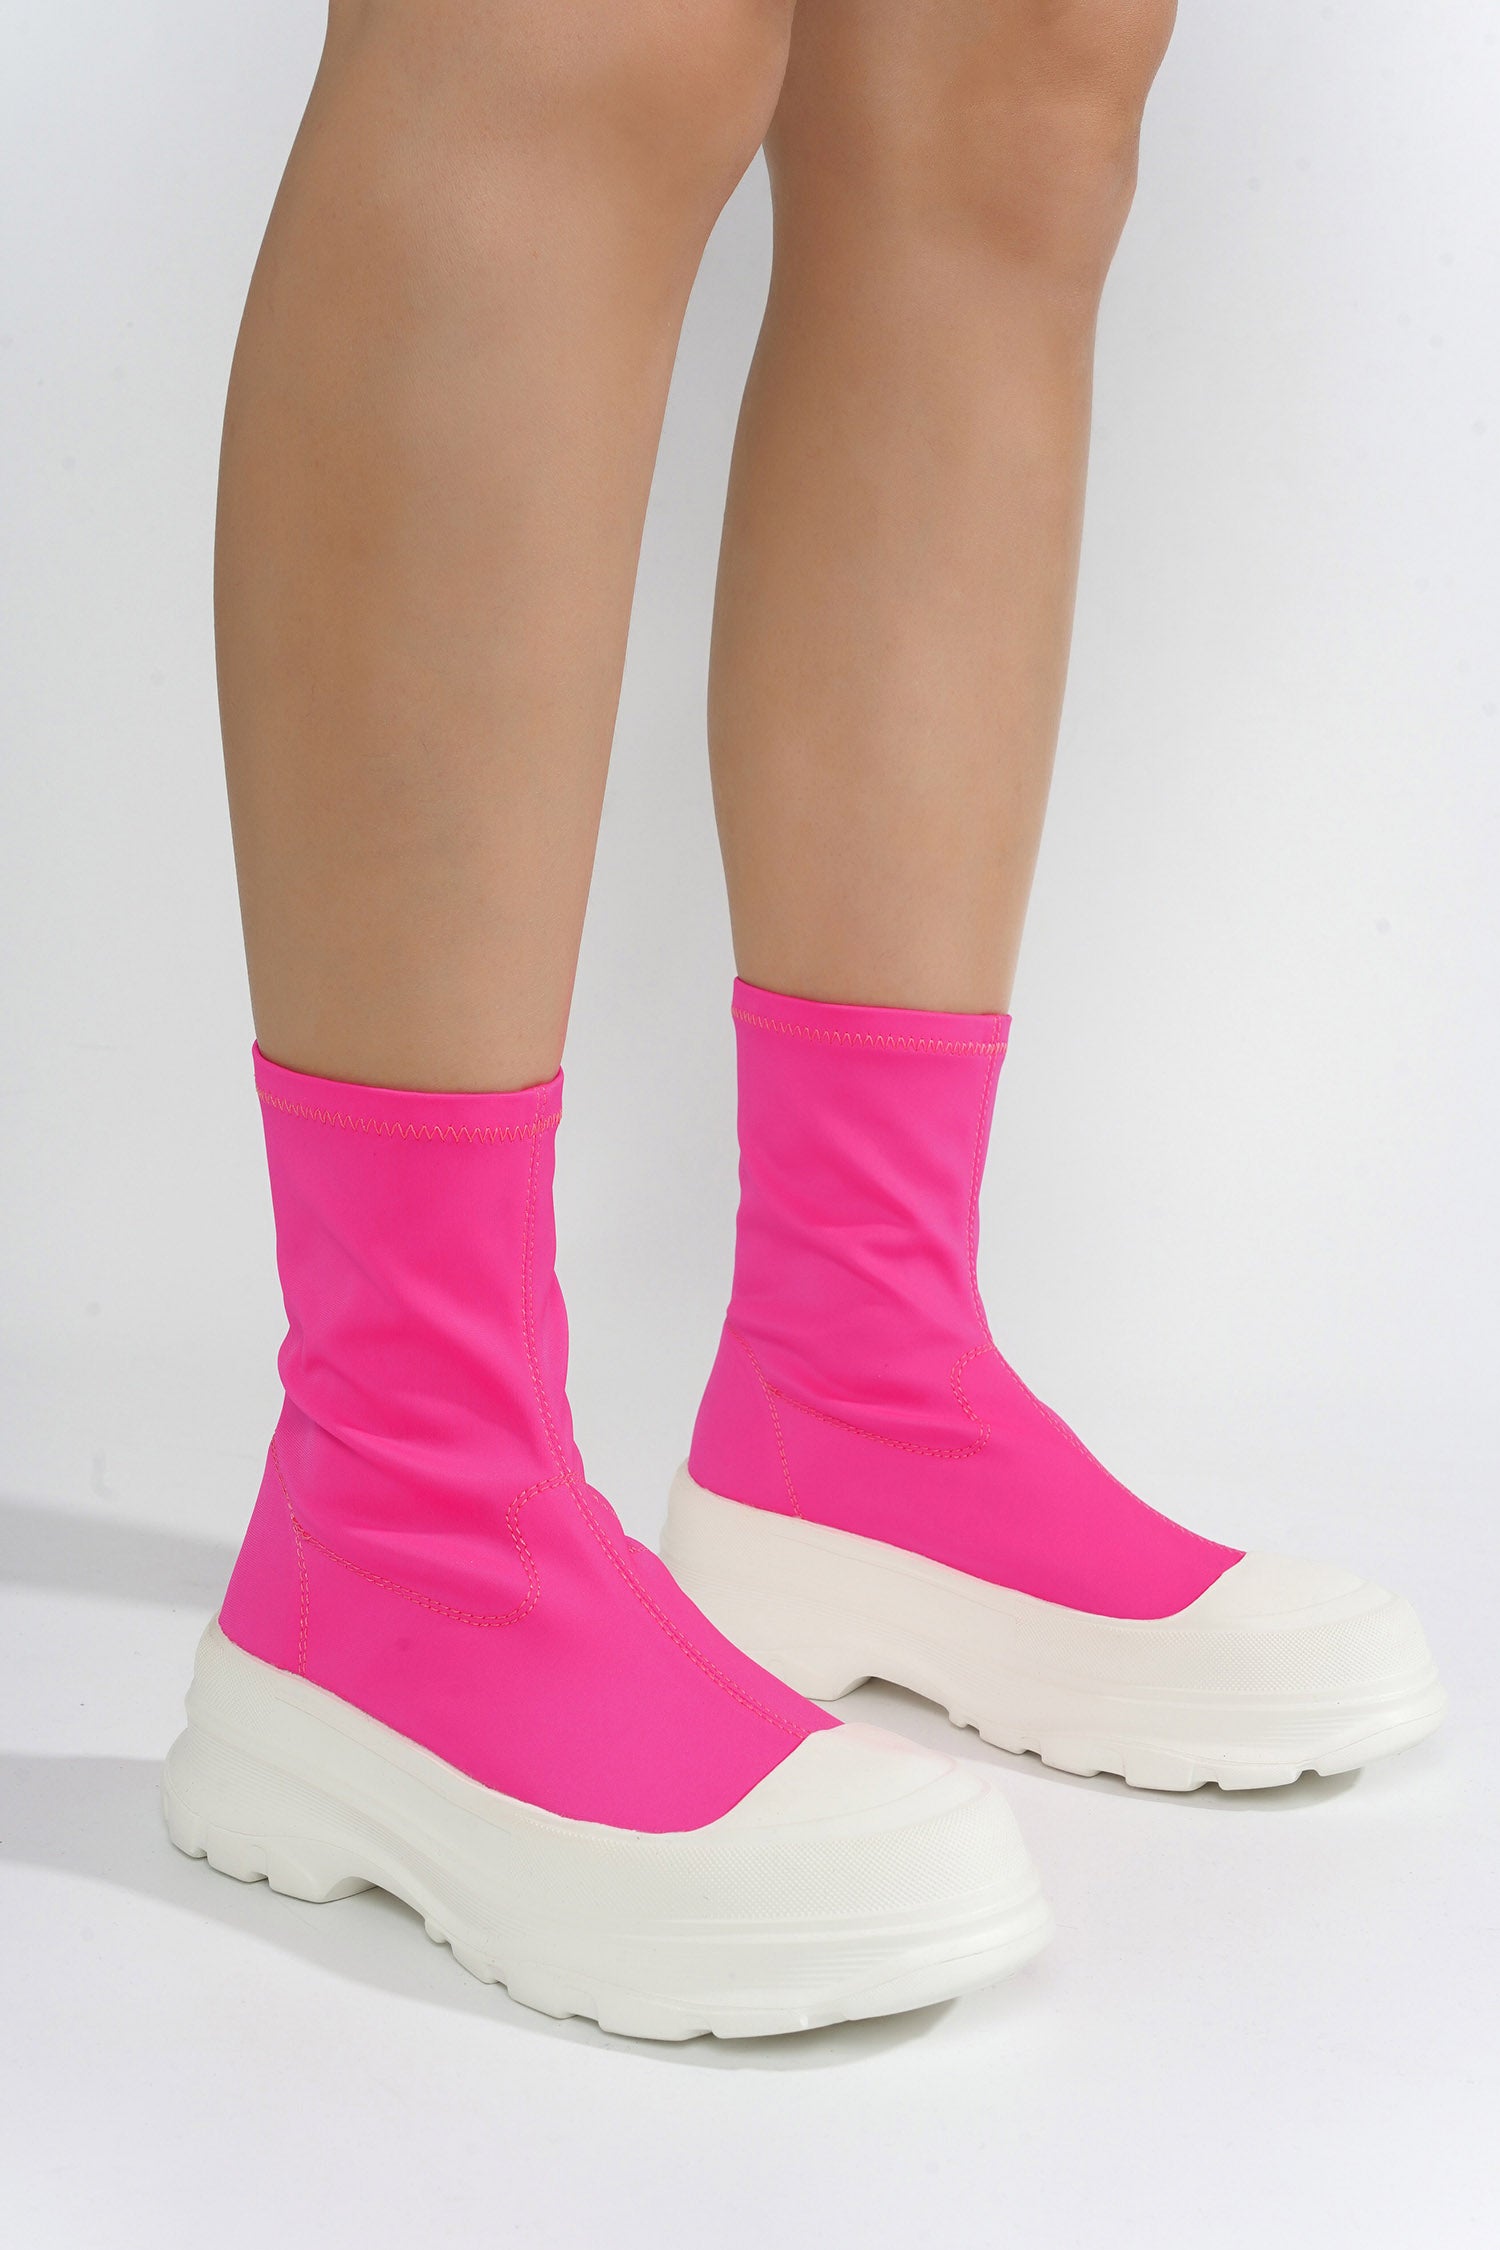 Cape Robbin - GIG - PINK - SNEAKERS